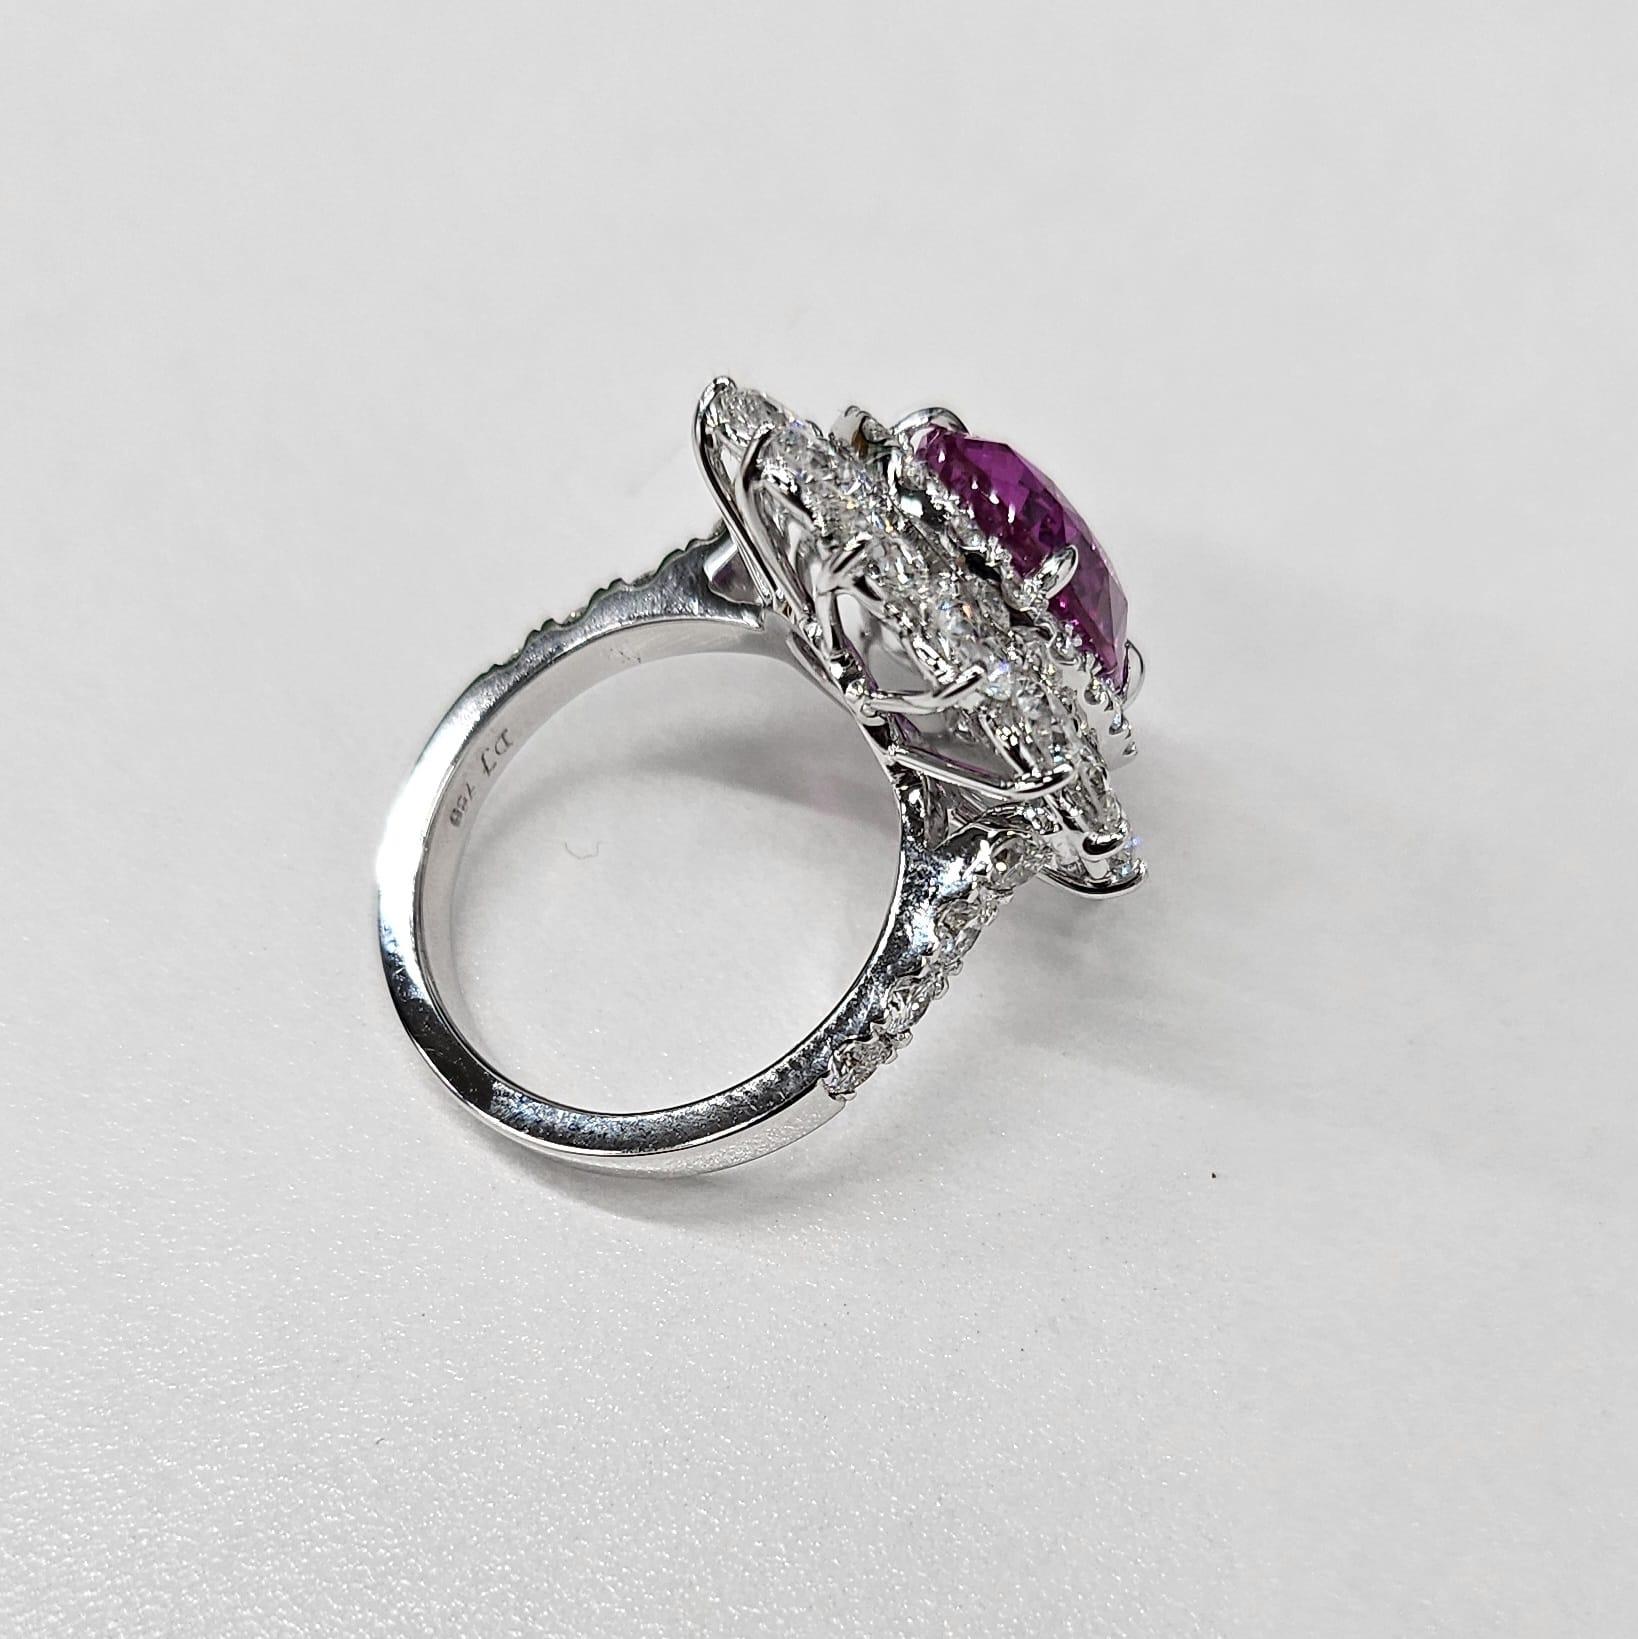 GRS Certified 5.81 Ct Pink Sapphire & 3.59 Ct Diamond Ring in 18K White Gold For Sale 5